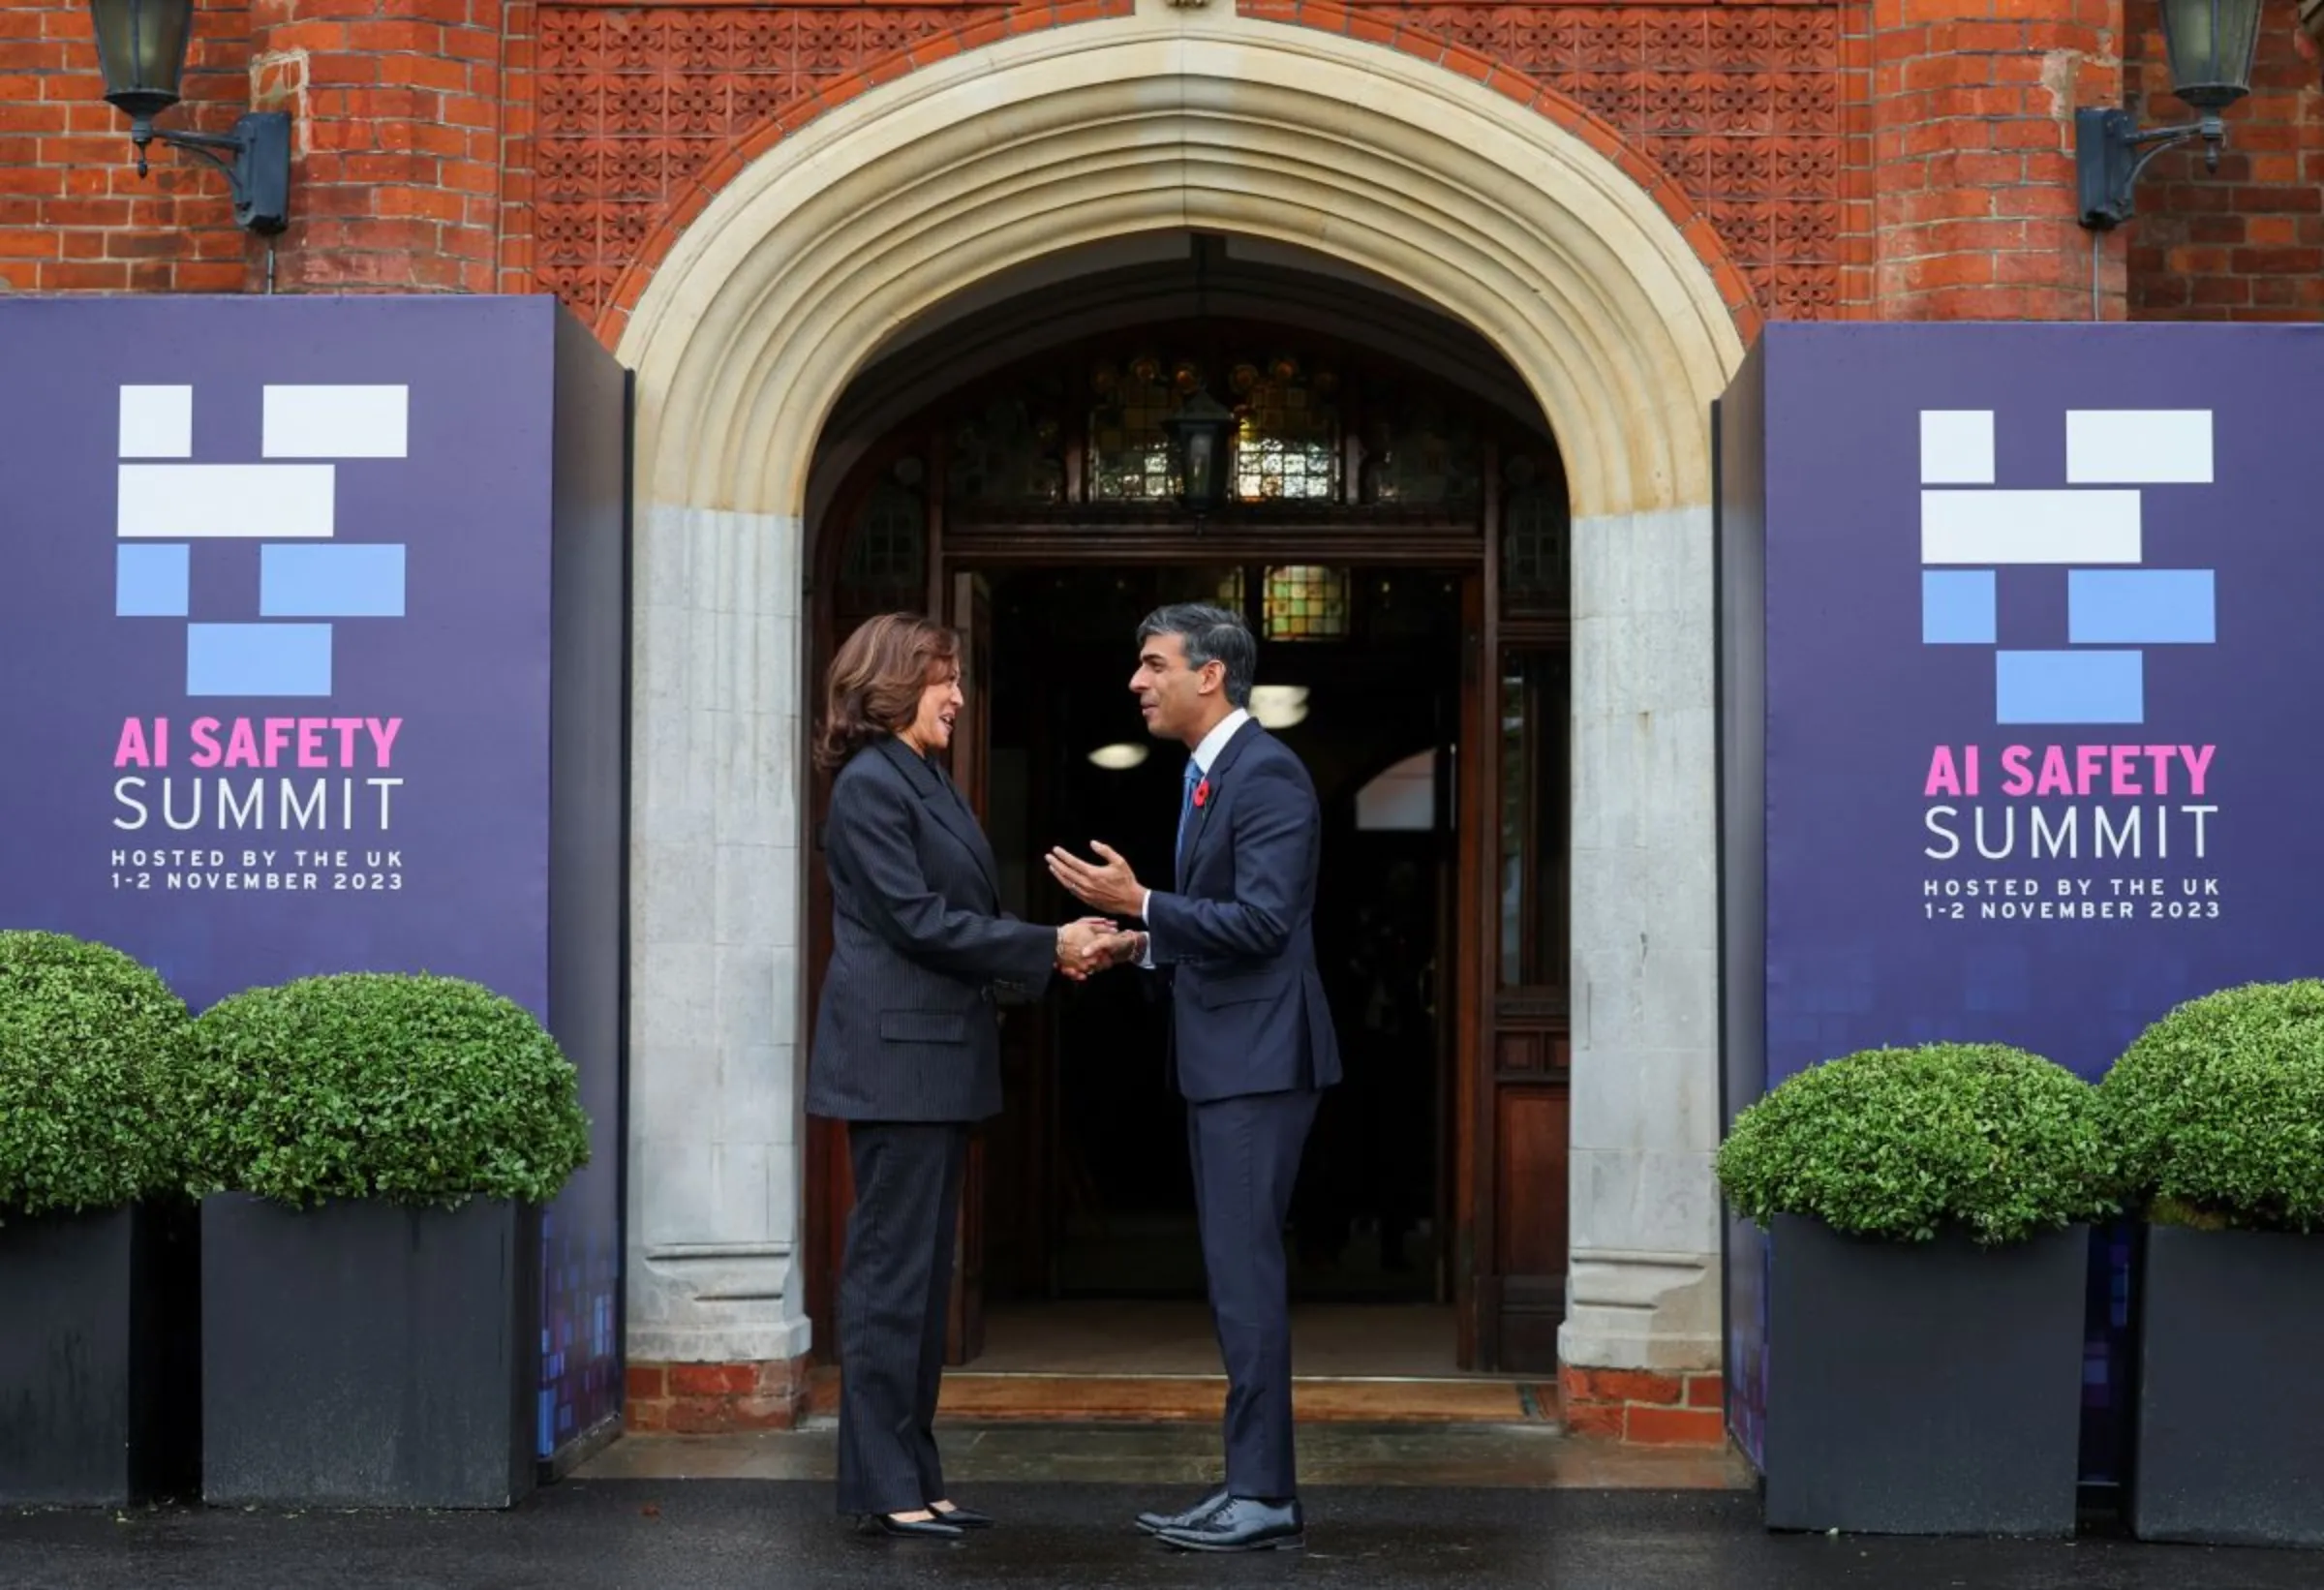 Britain's Prime Minister Rishi Sunak welcomes U.S. Vice President Kamala Harris at the AI Safety Summit in Bletchley Park, near Milton Keynes, Britain, November 2, 2023. REUTERS/Toby Melville